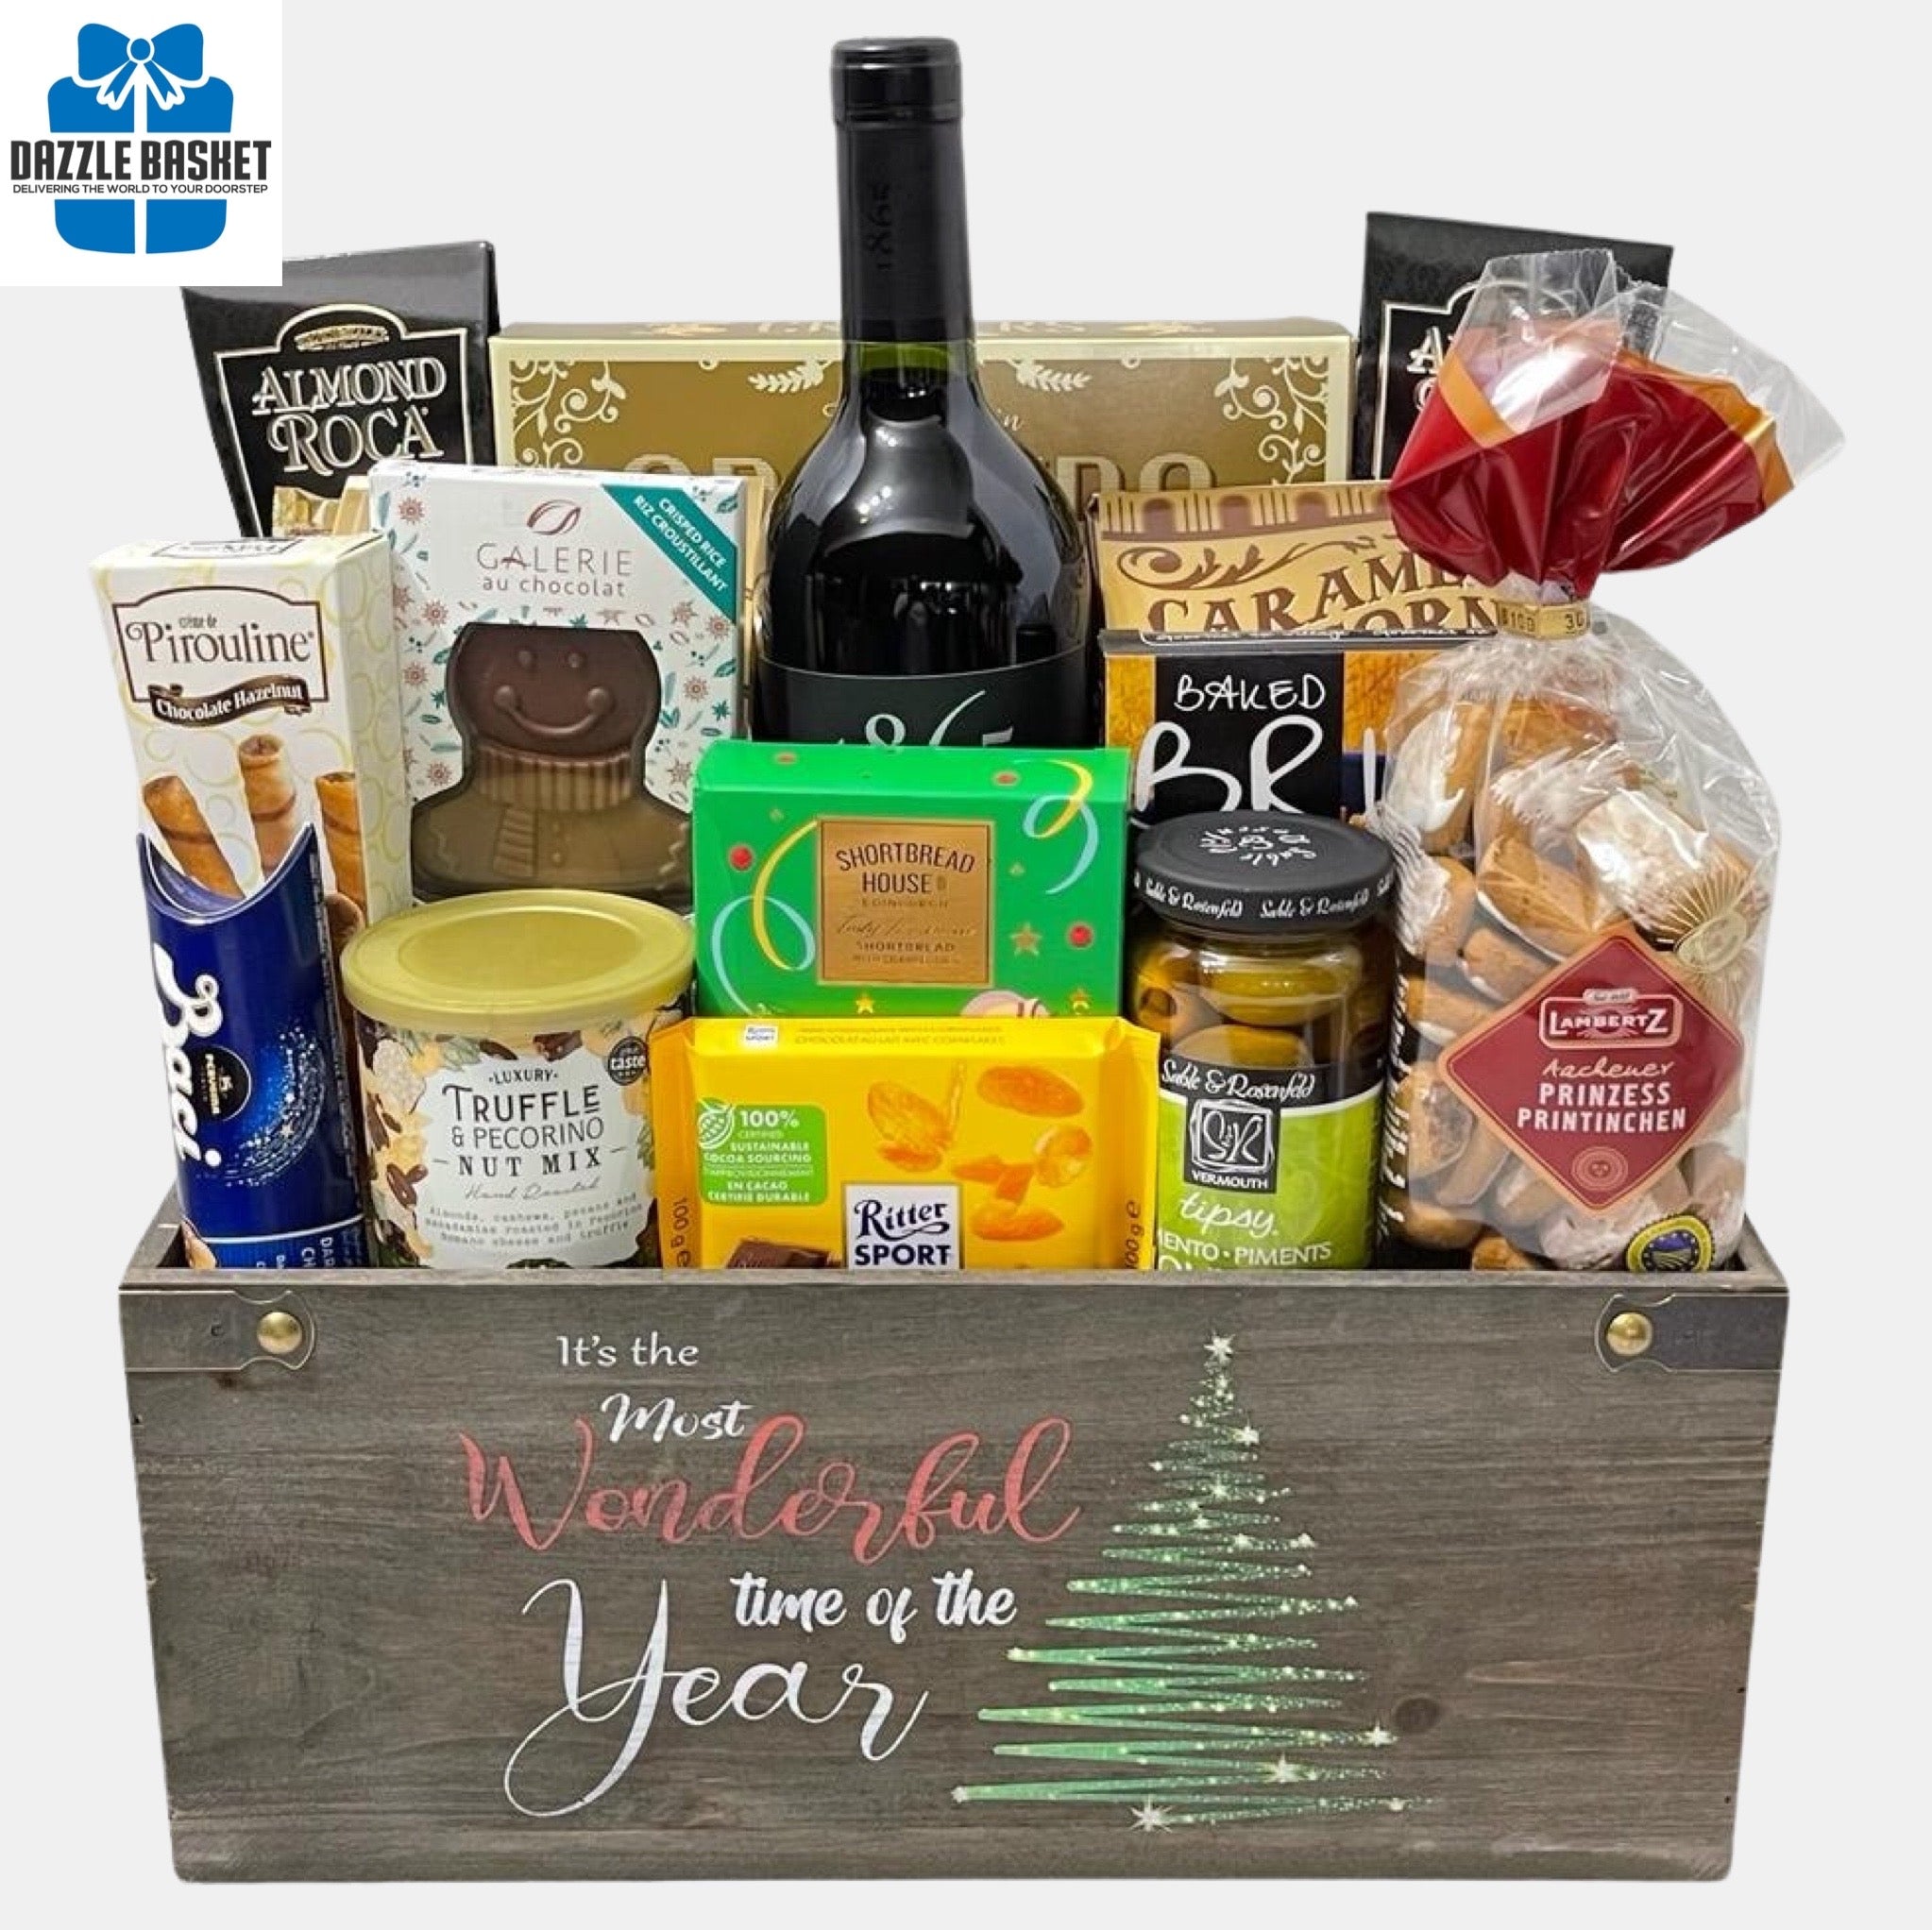 holiday gift baskets Calgary from Dazzle Basket- A wine gift basket overflowing with delicious gourmet snacks & bottle of wine.